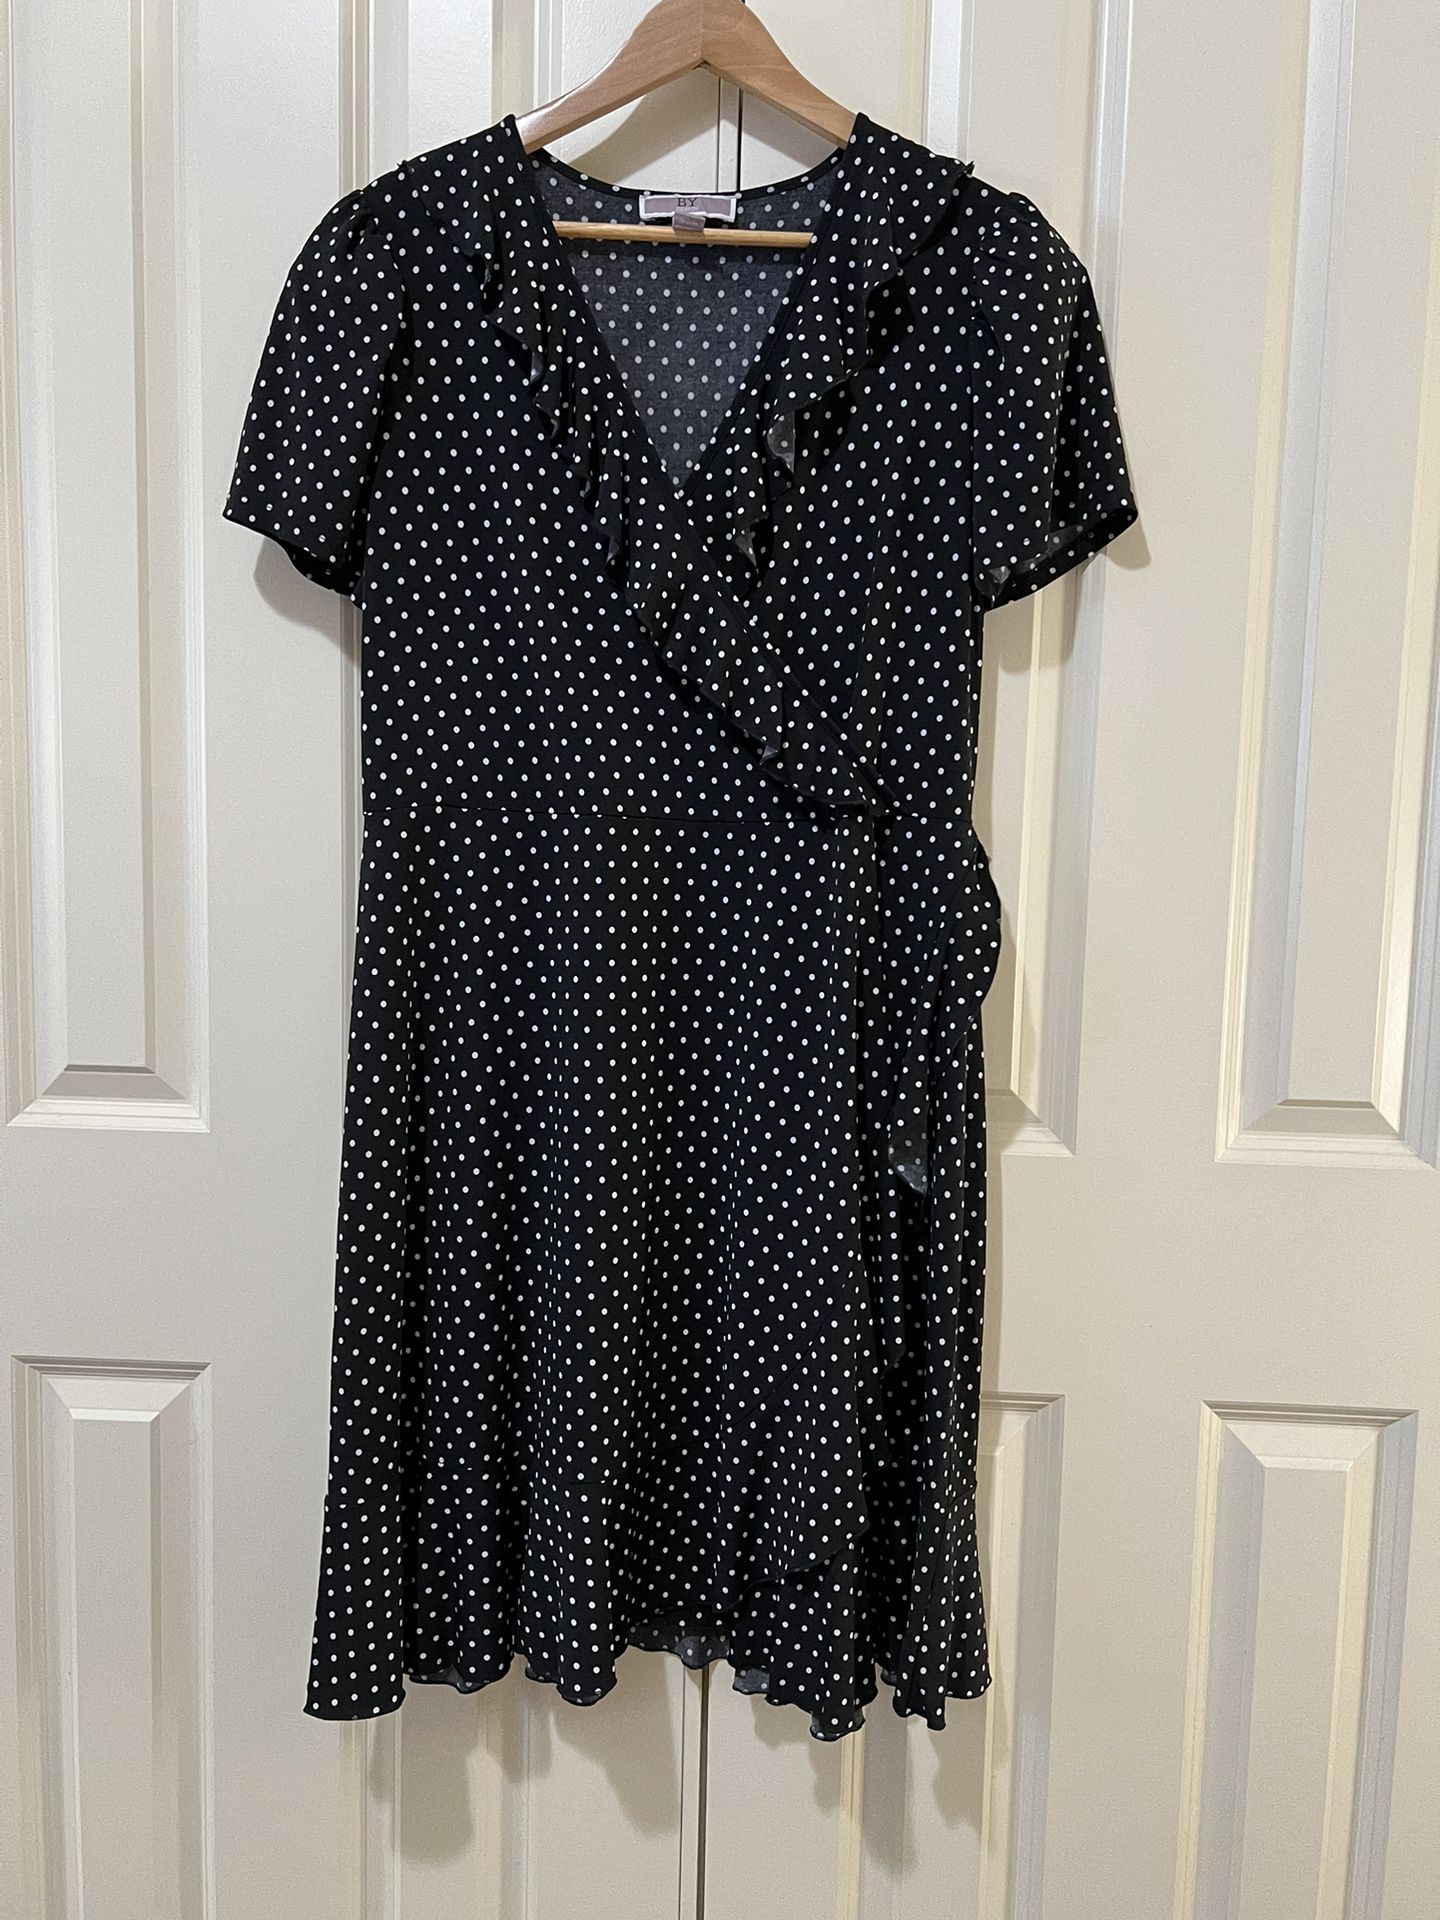 By Design Black Dress with White Polka Dots Size L 